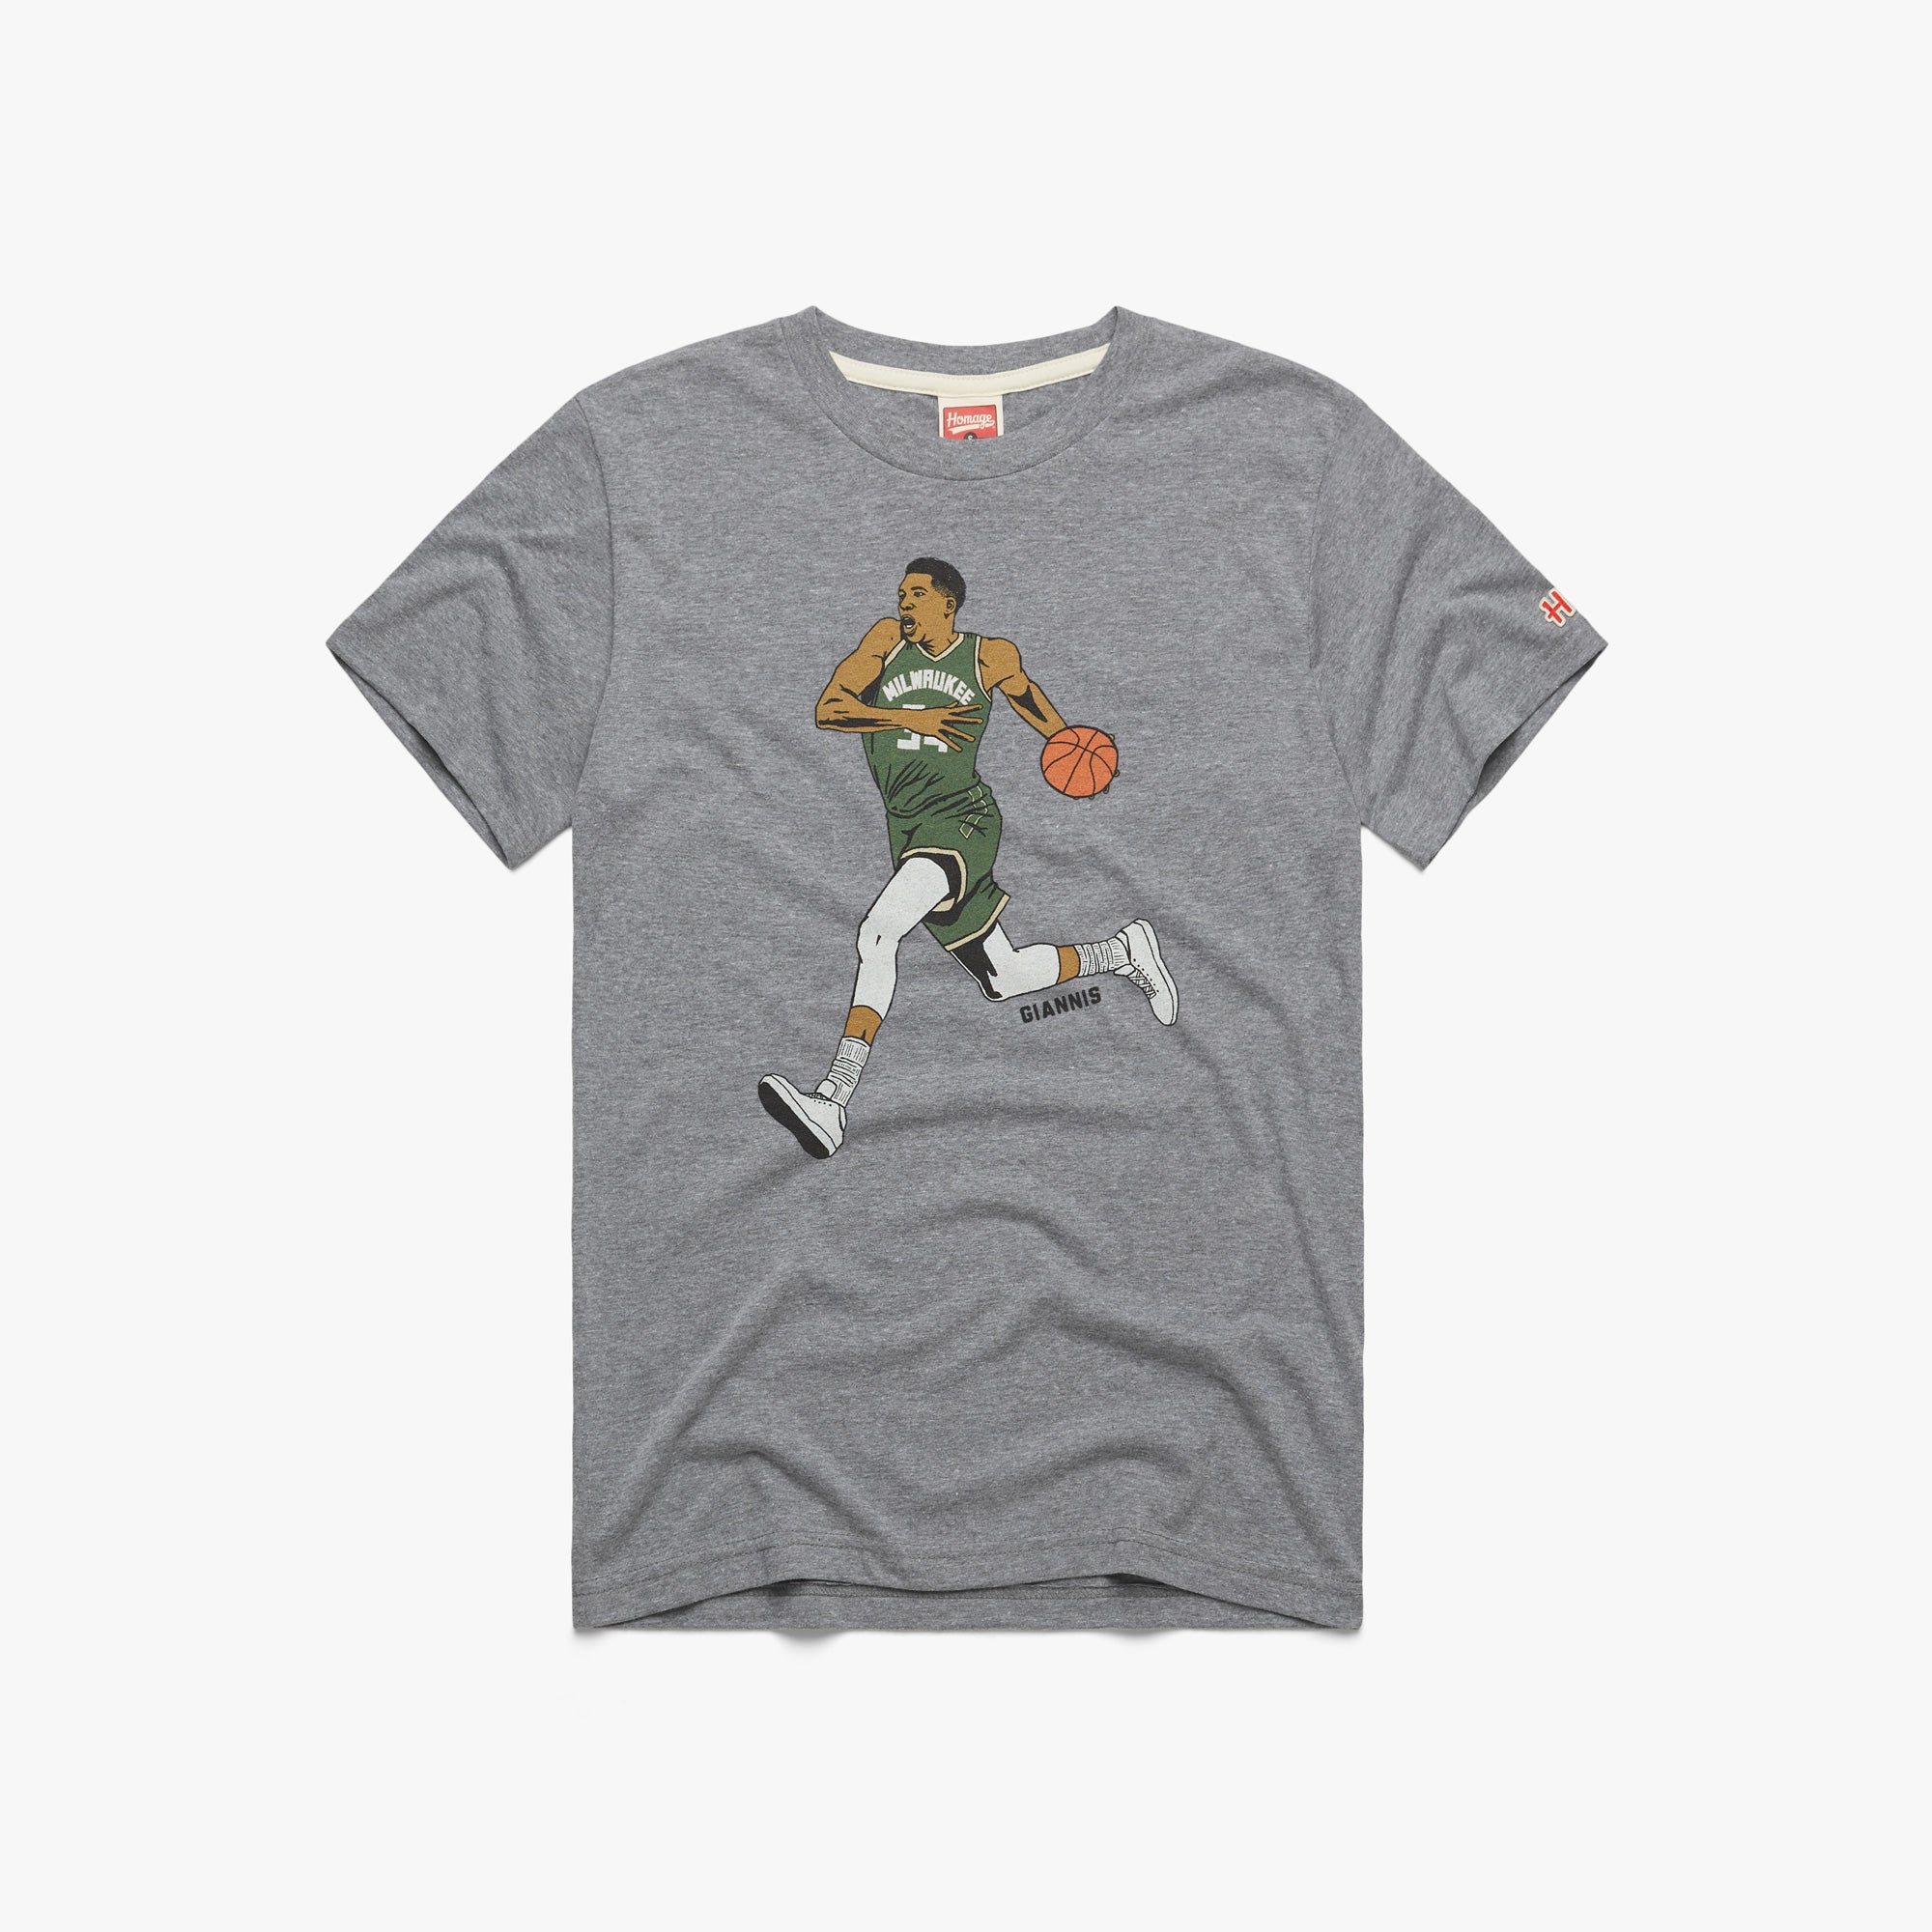 Chnge Merch Men Of Quality Don't Fear Equality Shirt Giannis Antetokounmpo  - Teechipus